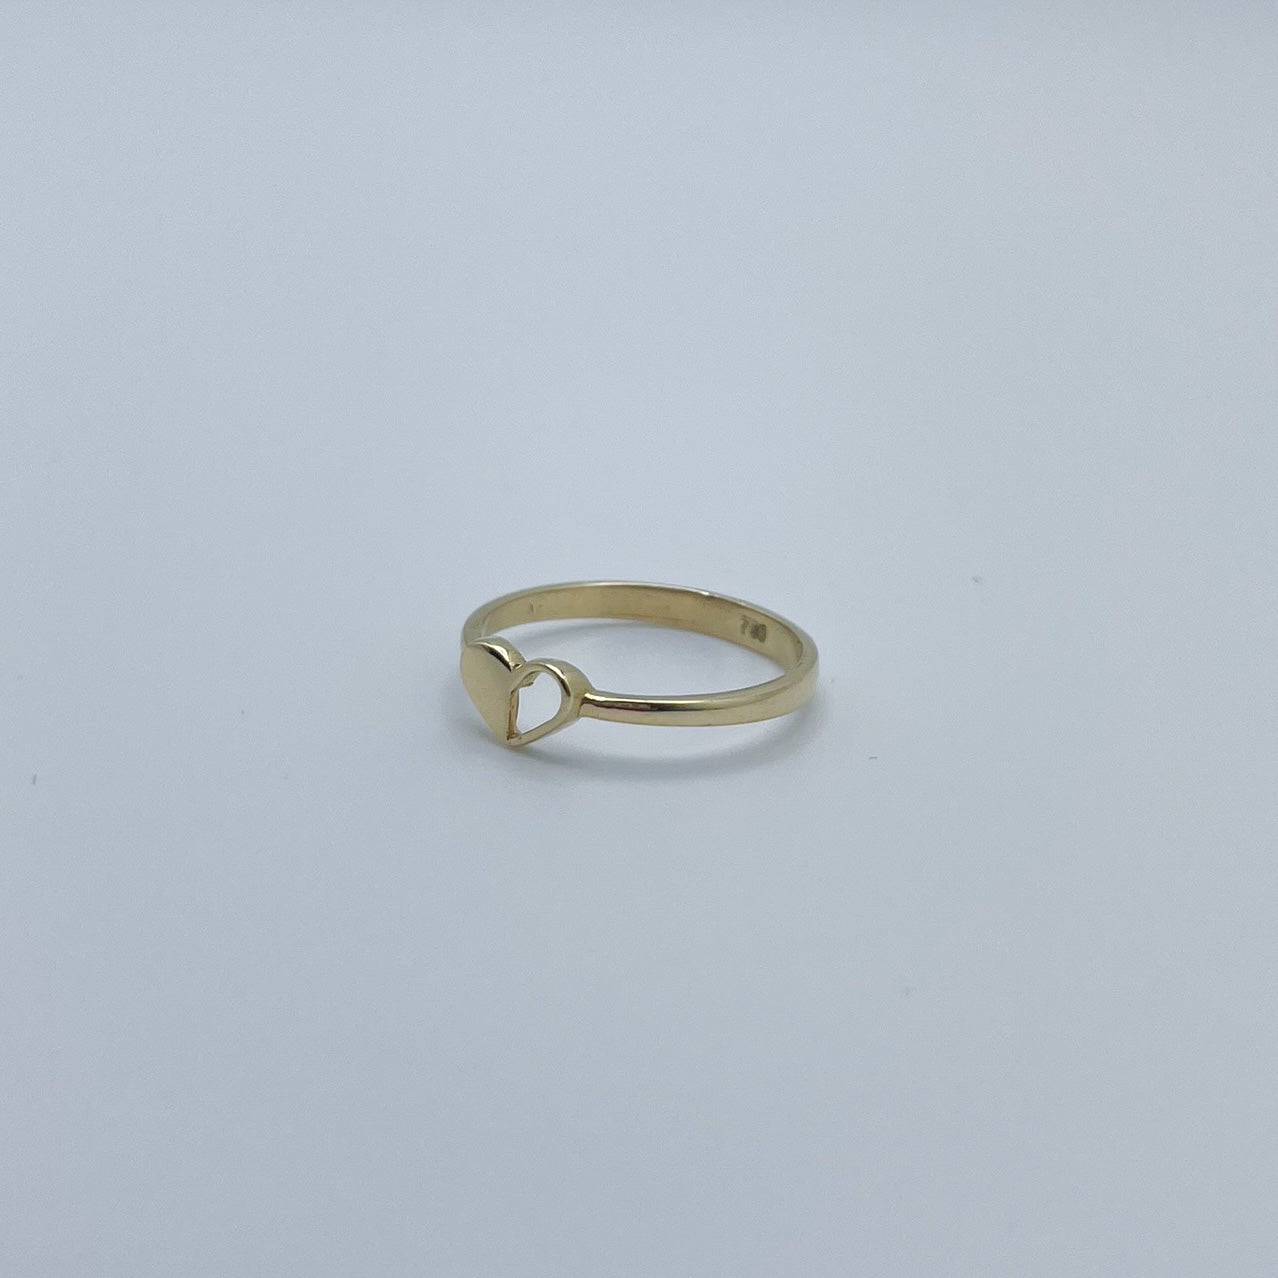 18K Compassion Ring